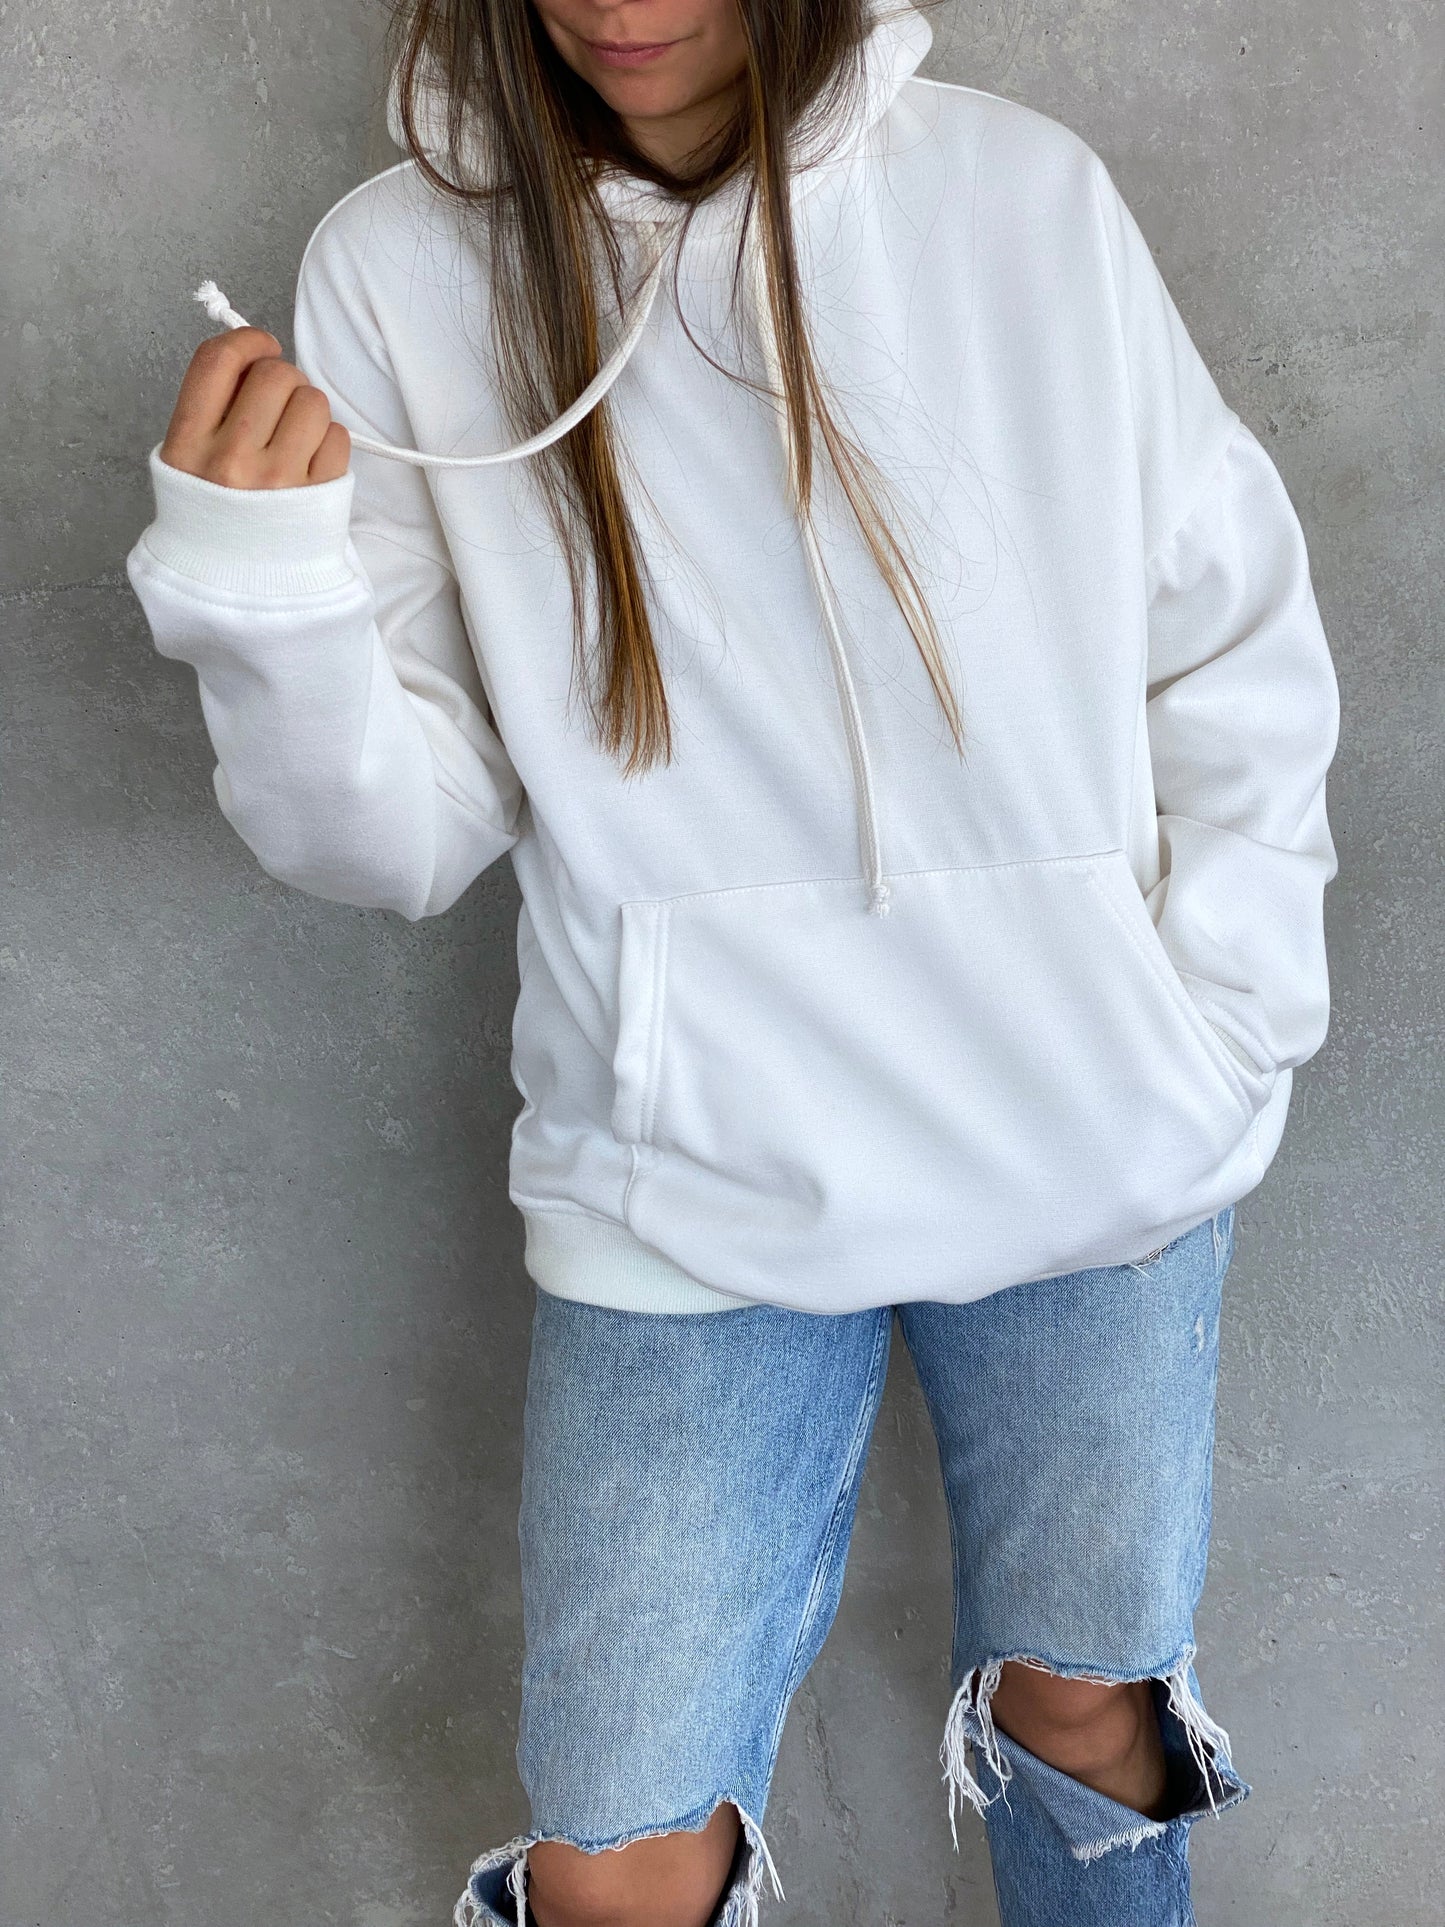 Perfecto Imperfecto Happiness Hoodie Talla S/M  #148